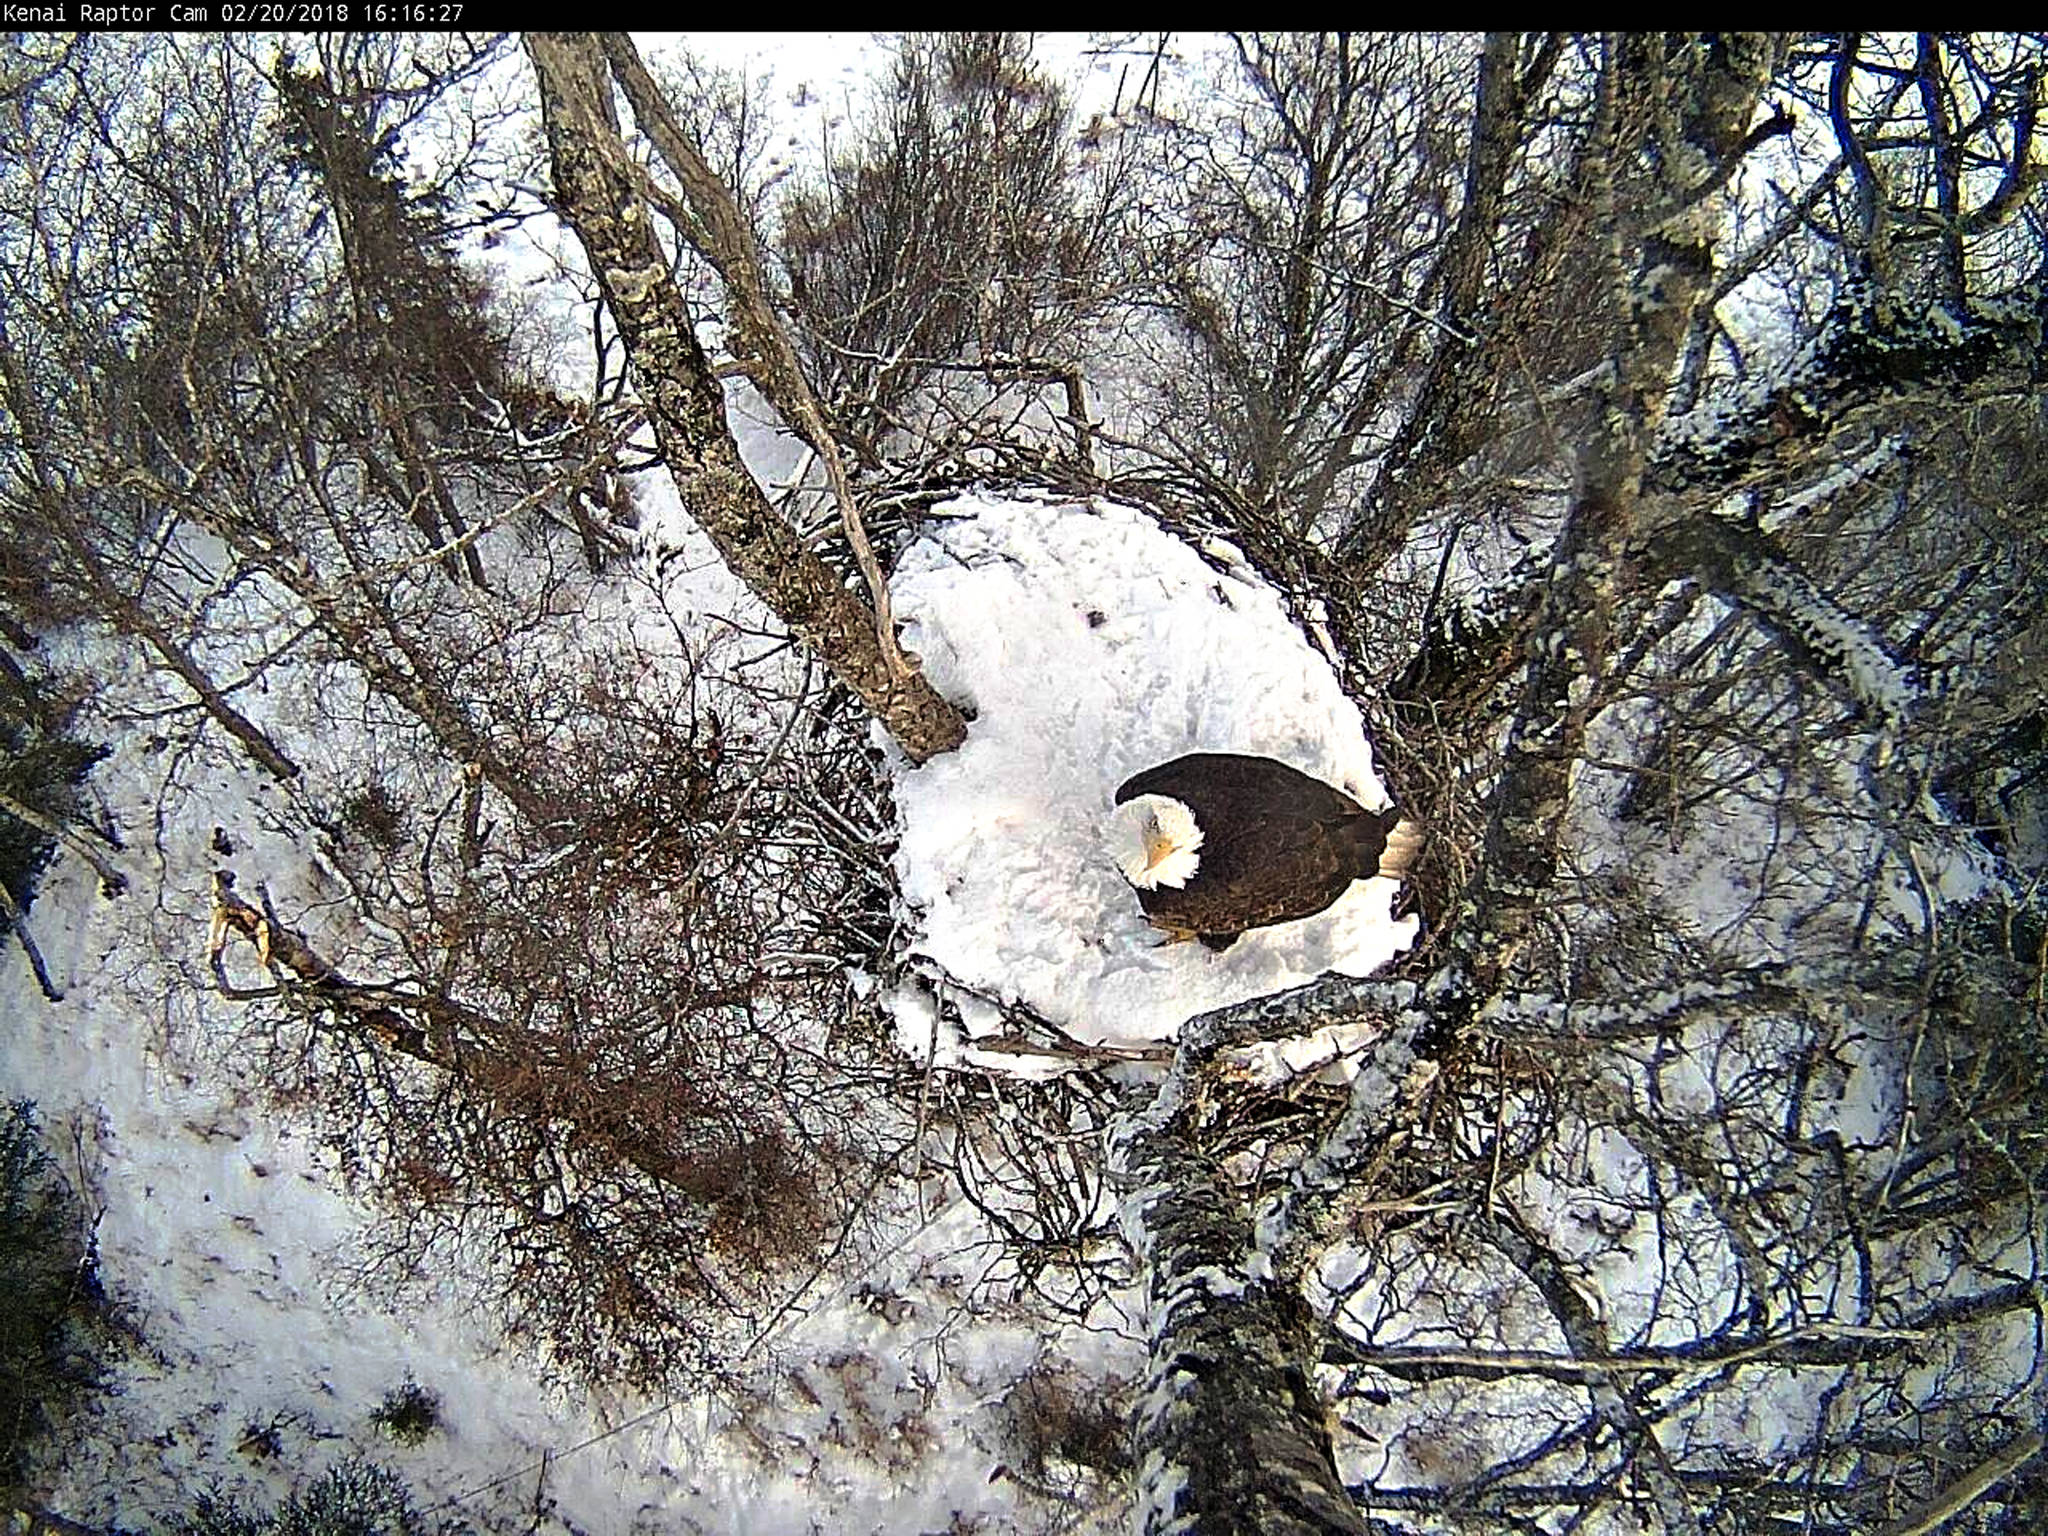 An eagle perches in the nest overseen by the city of Kenai’s streaming Eagle Cam on Tuesday, Feb. 20, 2018 in Kenai, Alaska. The camera — located on the property of a Kenai resident who remains anonymous to protect the eagles from harassment — streamed online for the first time last July, drawing about 2 million viewer-minutes. On Wednesday, the Kenai city council voted unanimously to spend $1,600 on an upgraded camera for the site. Though the feed is only public in the summer, it still streams into Kenai City Hall, where Kenai information technology manager Dan Castimore took this recent capture. (Courtesy City of Kenai).